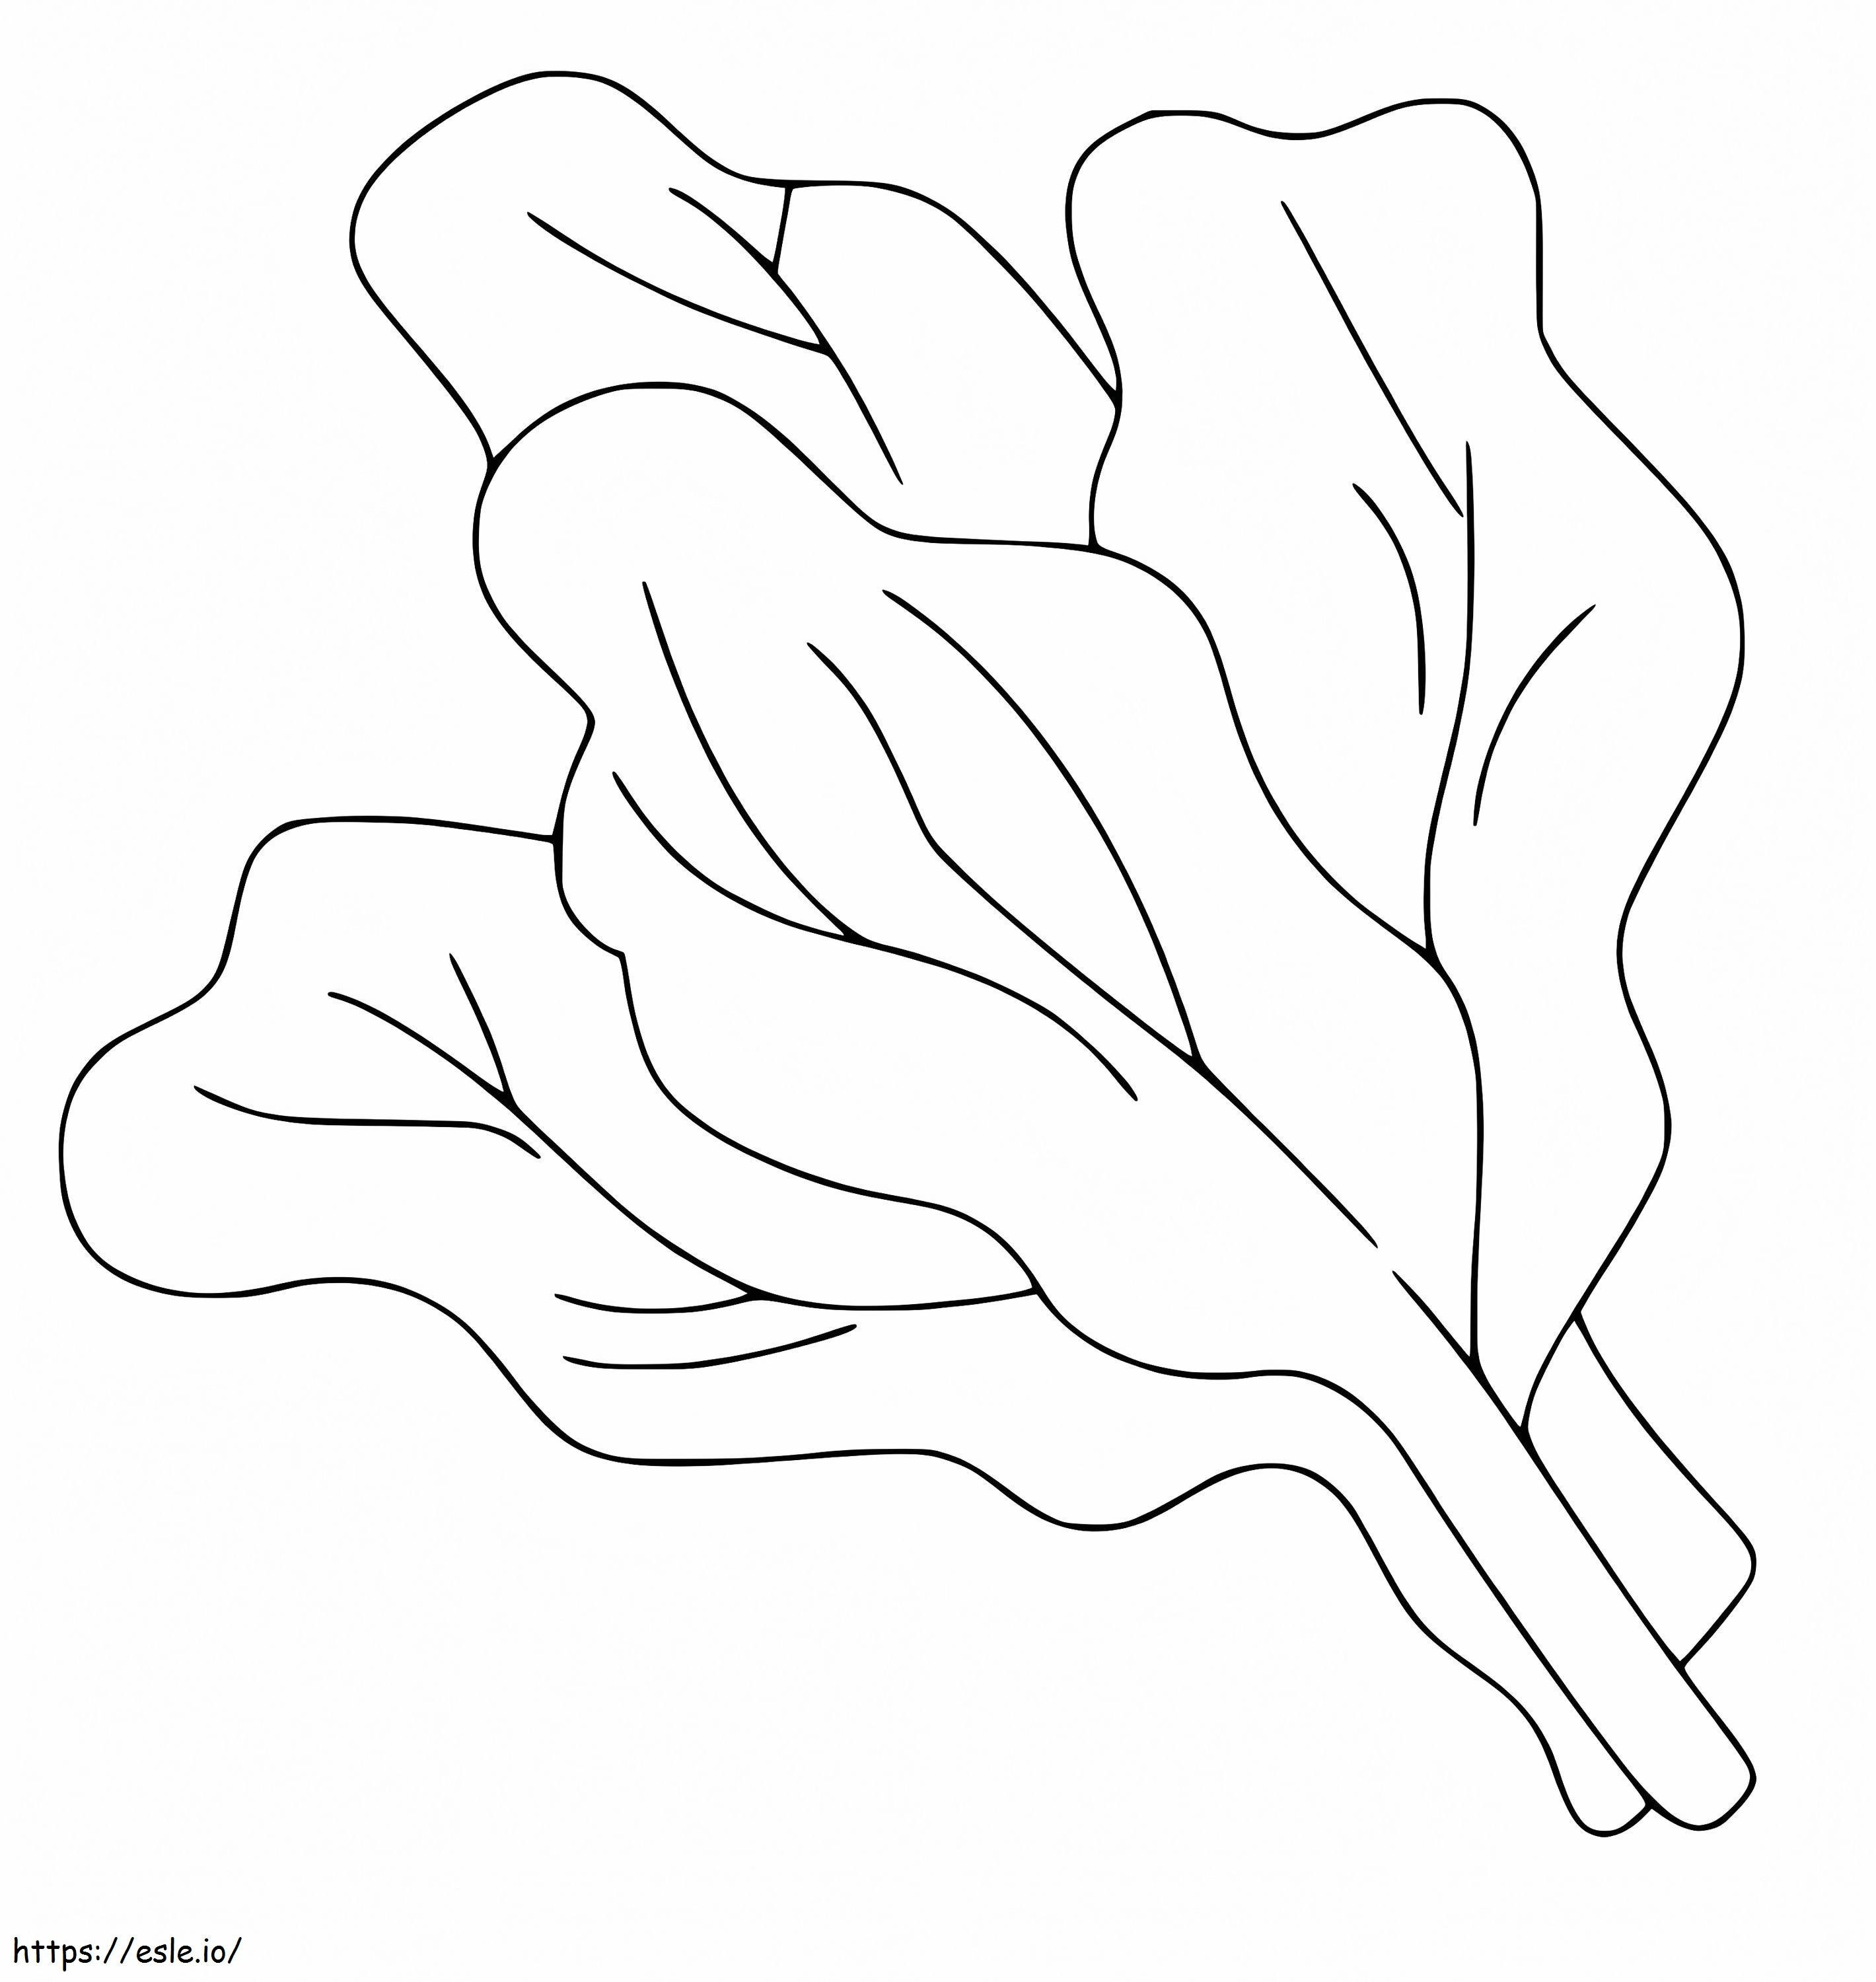 Easy Spinach Coloring Pahe coloring page